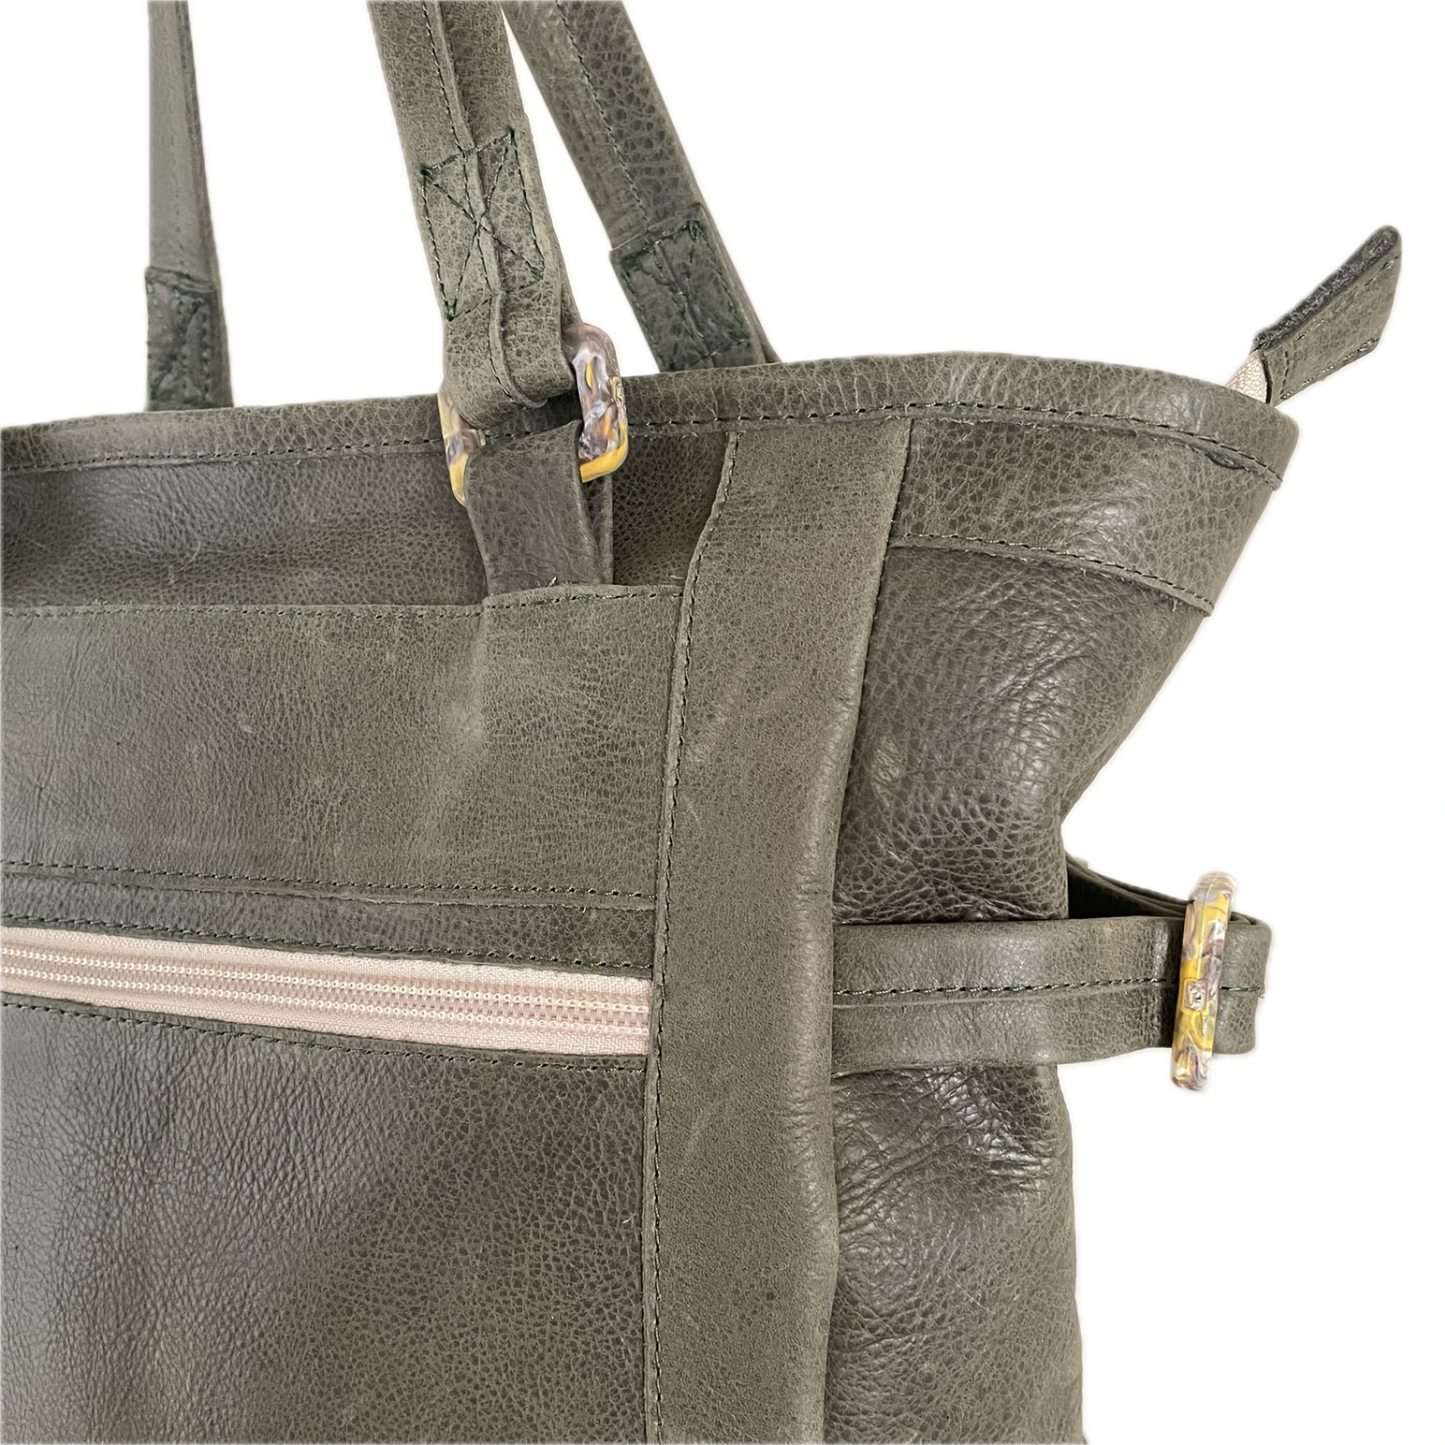 Ventura Olive Green Repurposed Leather Tote Backpack